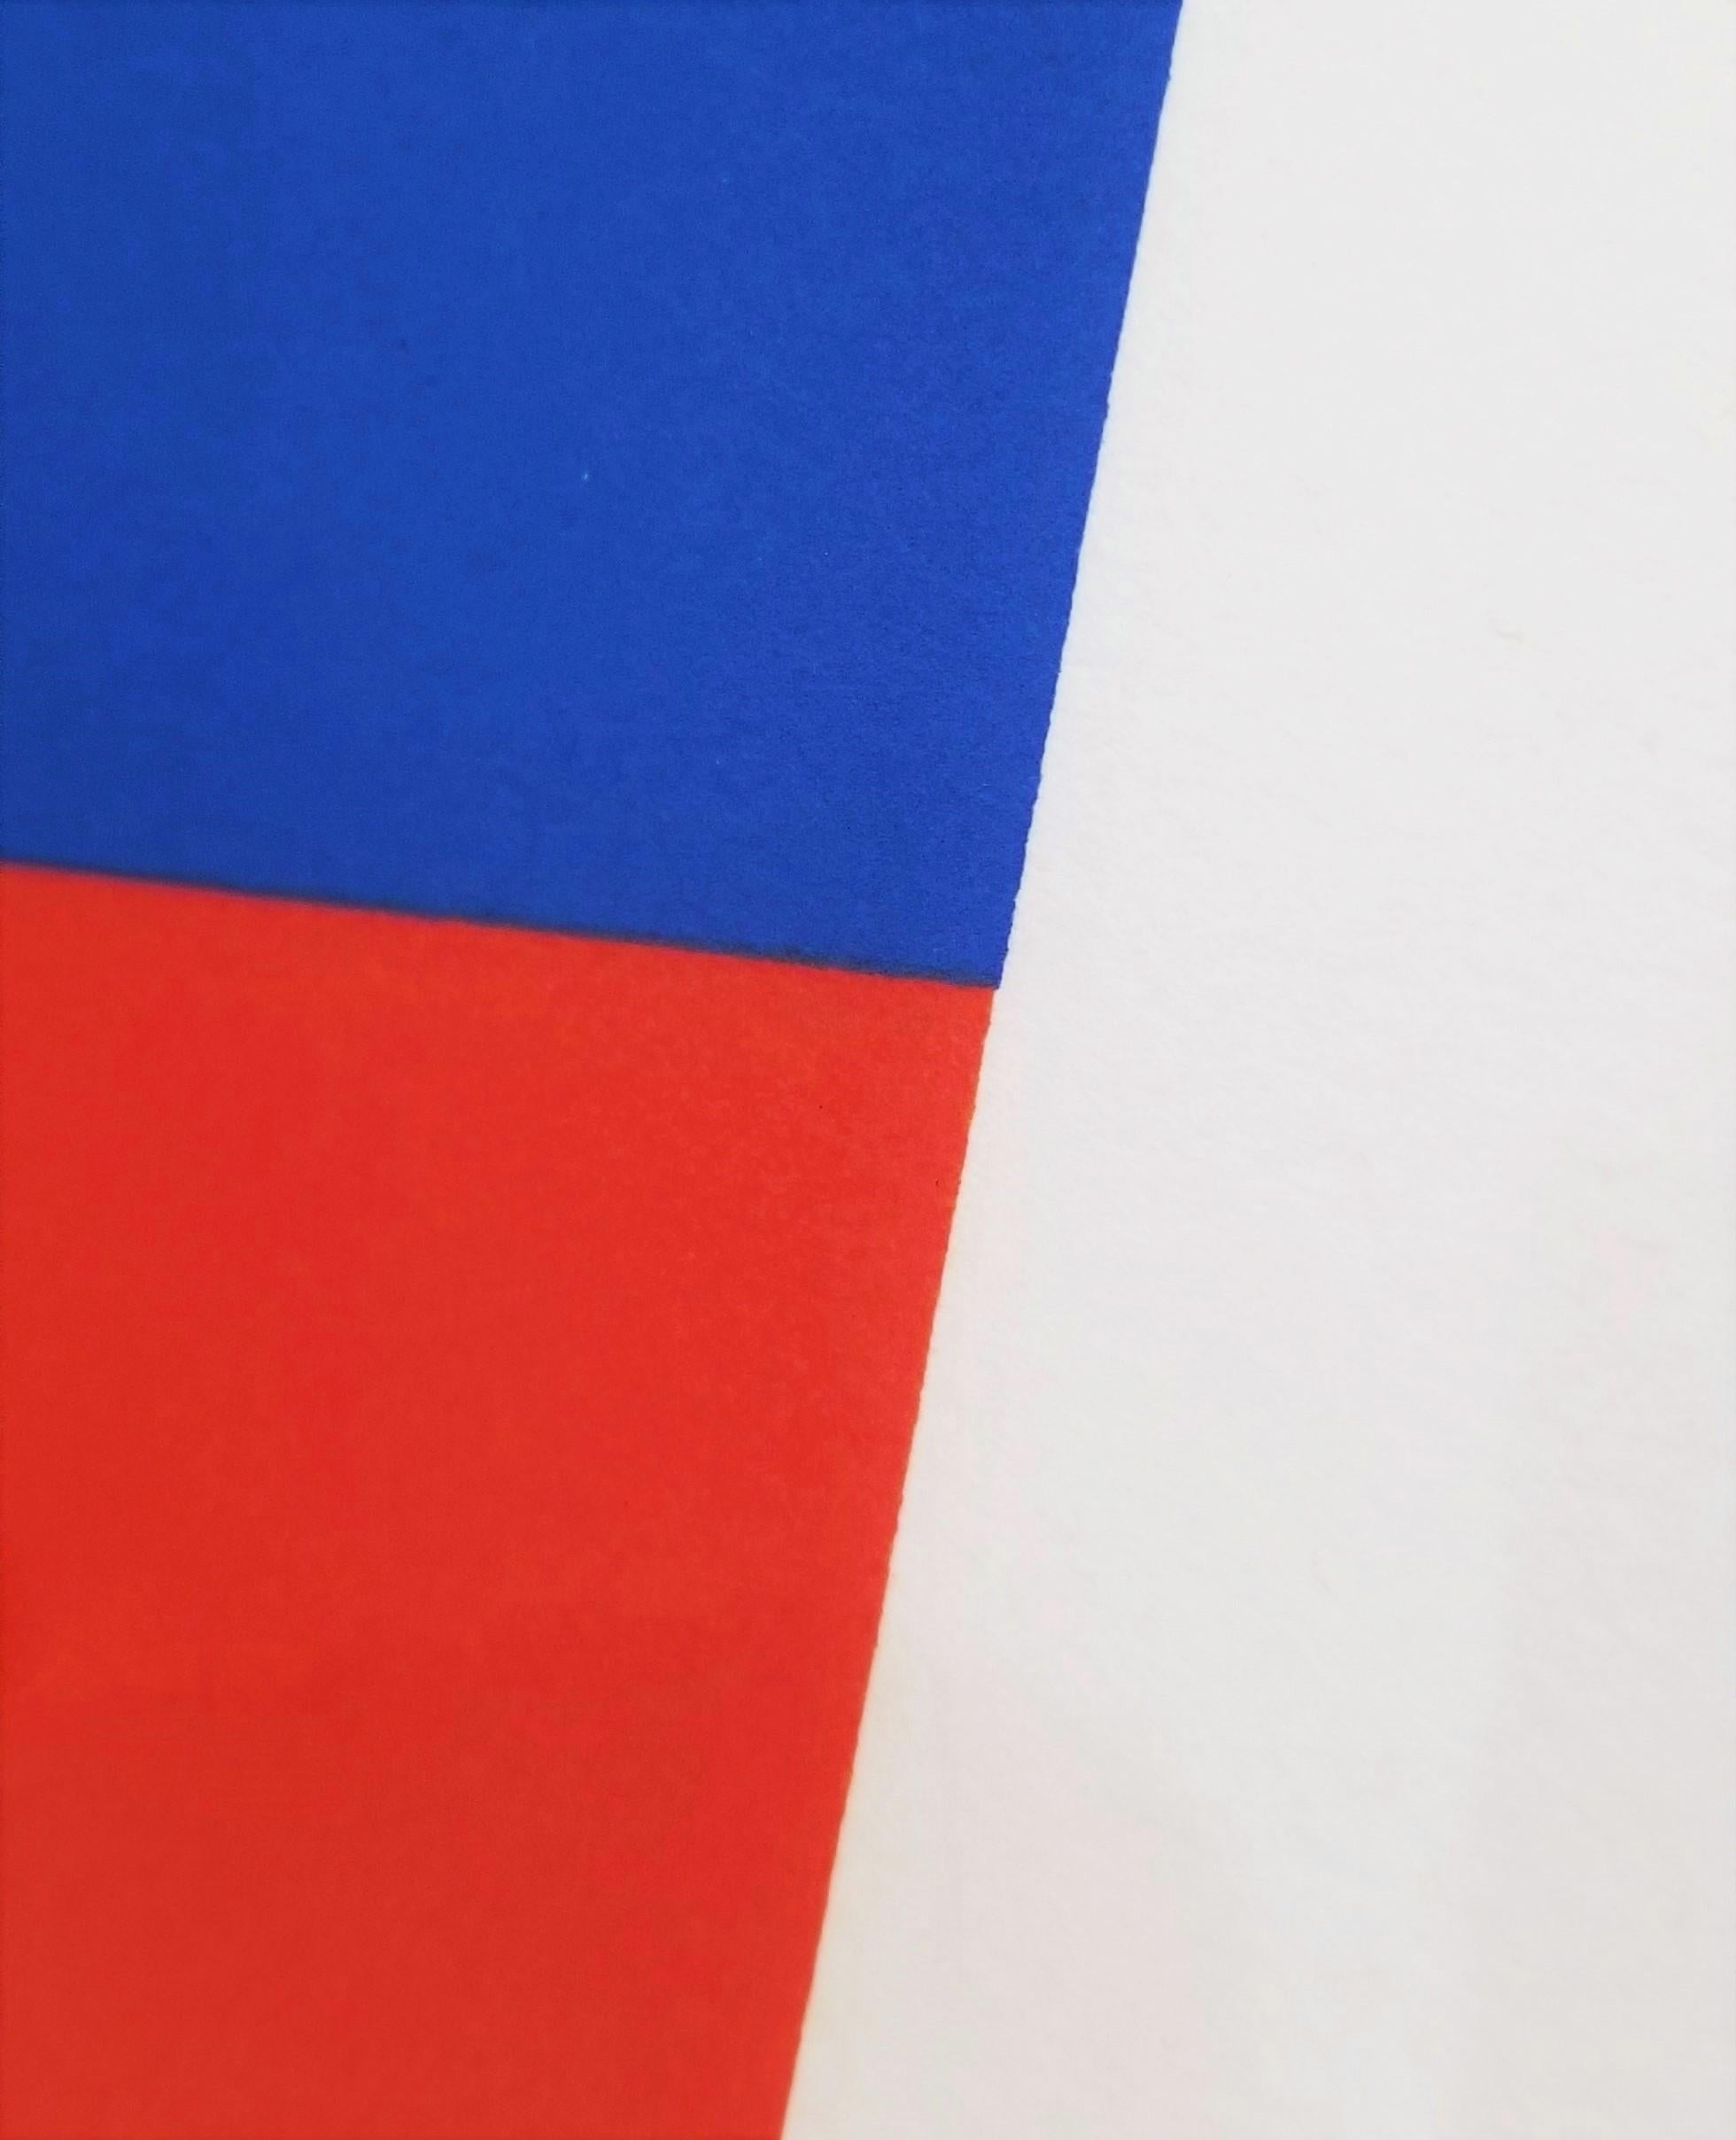 Blue/Red-Orange /// Contemporary Abstract Geometric Minimalism Ellsworth Kelly  For Sale 7